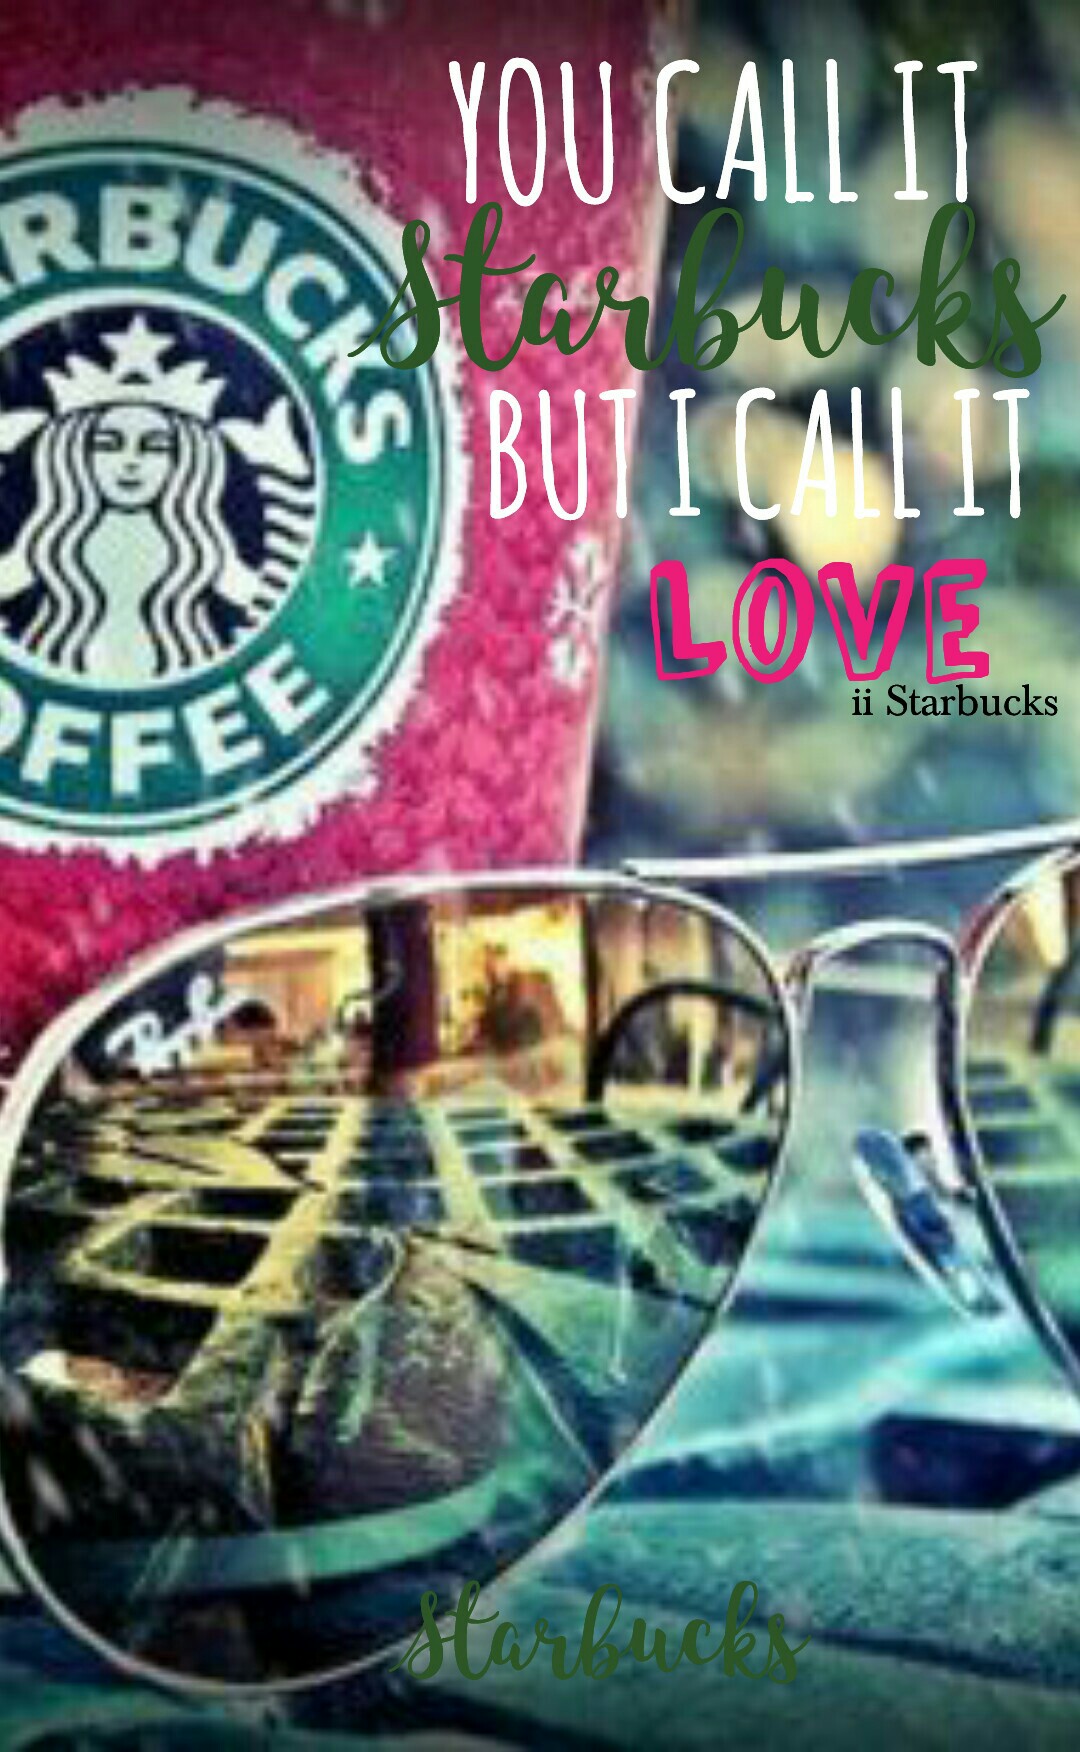 ☕Tap☕
You Call It S T A R B U C K S
But I Call It ❤
OMG!!! 20+ FOLLOWERS!! You Guys Are Awesome 😃|
 💚 This If You ❤ Starbucks!!